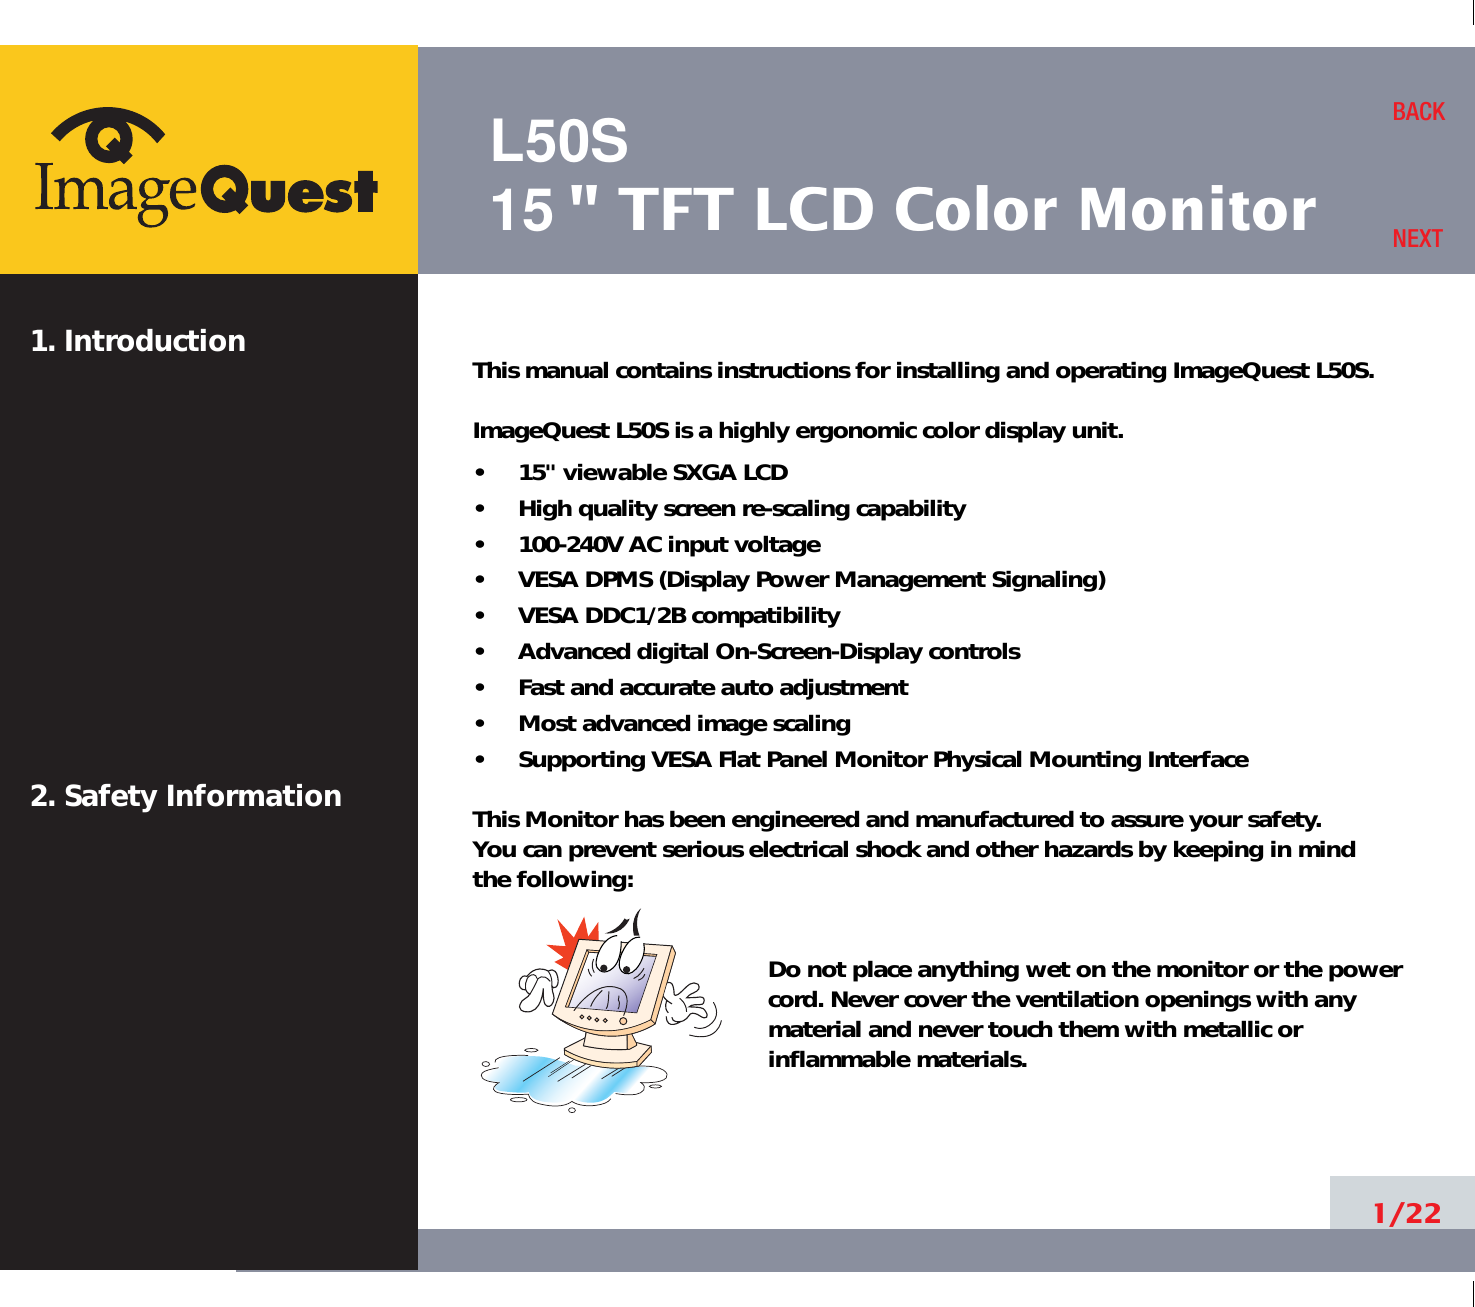 L50S15&quot; TFT LCD Color Monitor1. Introduction2. Safety Information1/22BACKNEXTThis manual contains instructions for installing and operating ImageQuest L50S.ImageQuest L50S is a highly ergonomic color display unit.•     15&quot; viewable SXGA LCD•     High quality screen re-scaling capability•     100-240V AC input voltage•     VESA DPMS (Display Power Management Signaling)•     VESA DDC1/2B compatibility•     Advanced digital On-Screen-Display controls•     Fast and accurate auto adjustment  •     Most advanced image scaling•     Supporting VESA Flat Panel Monitor Physical Mounting InterfaceThis Monitor has been engineered and manufactured to assure your safety. You can prevent serious electrical shock and other hazards by keeping in mind the following:Do not place anything wet on the monitor or the powercord. Never cover the ventilation openings with anymaterial and never touch them with metallic or inflammable materials.